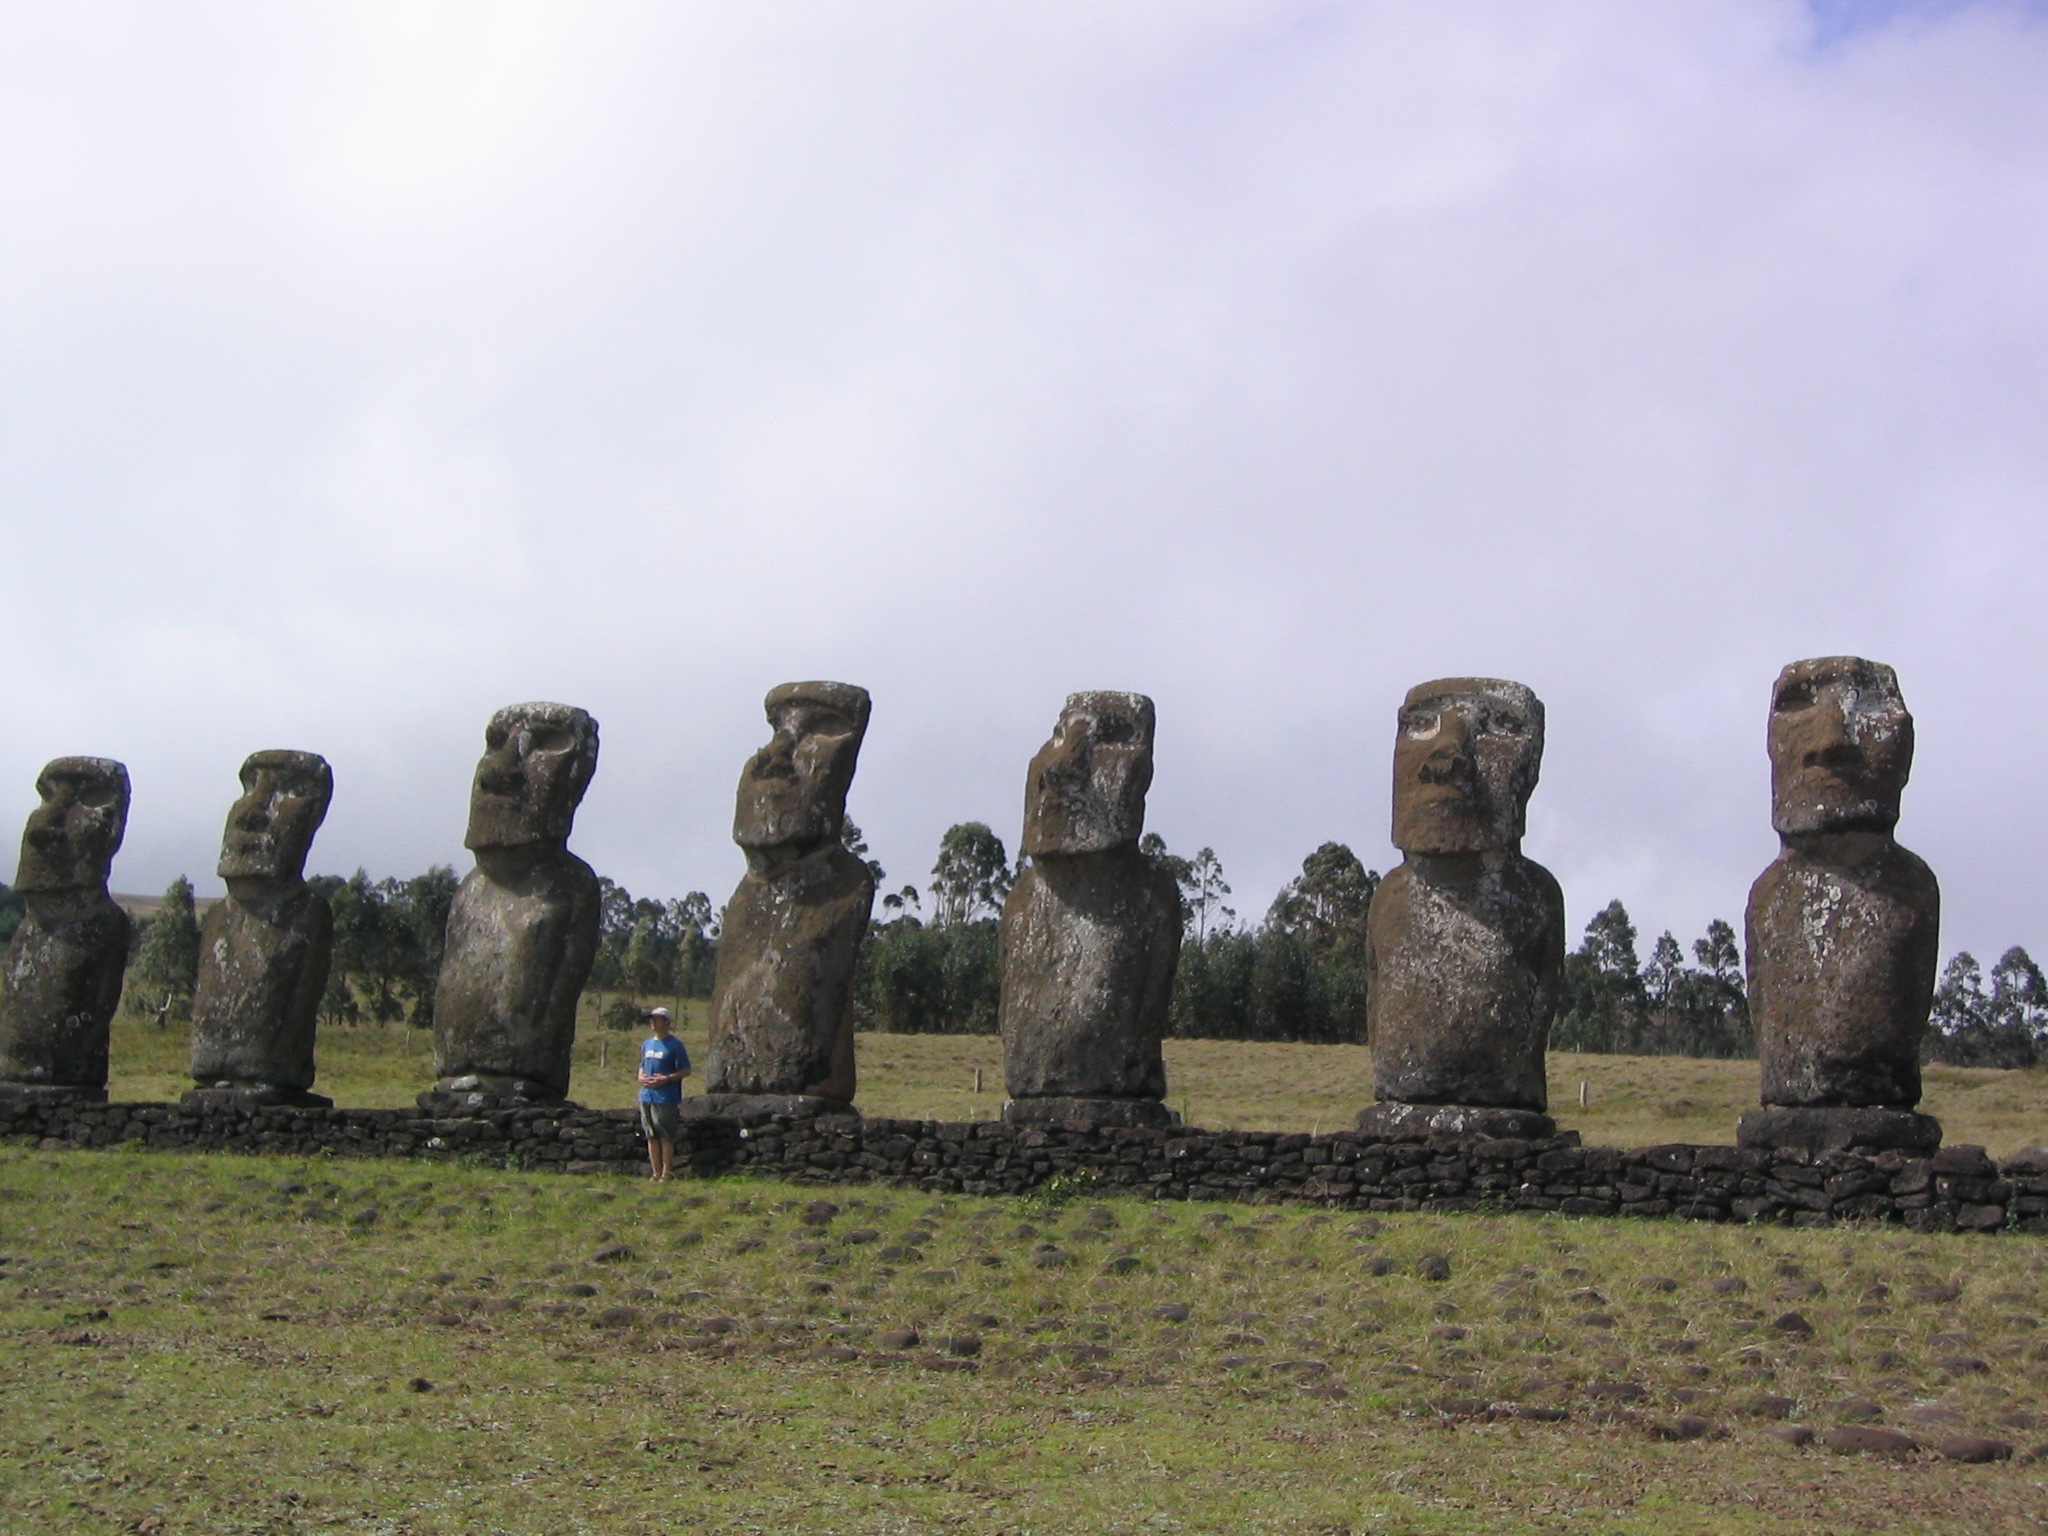 people standing around the giant statues in the field